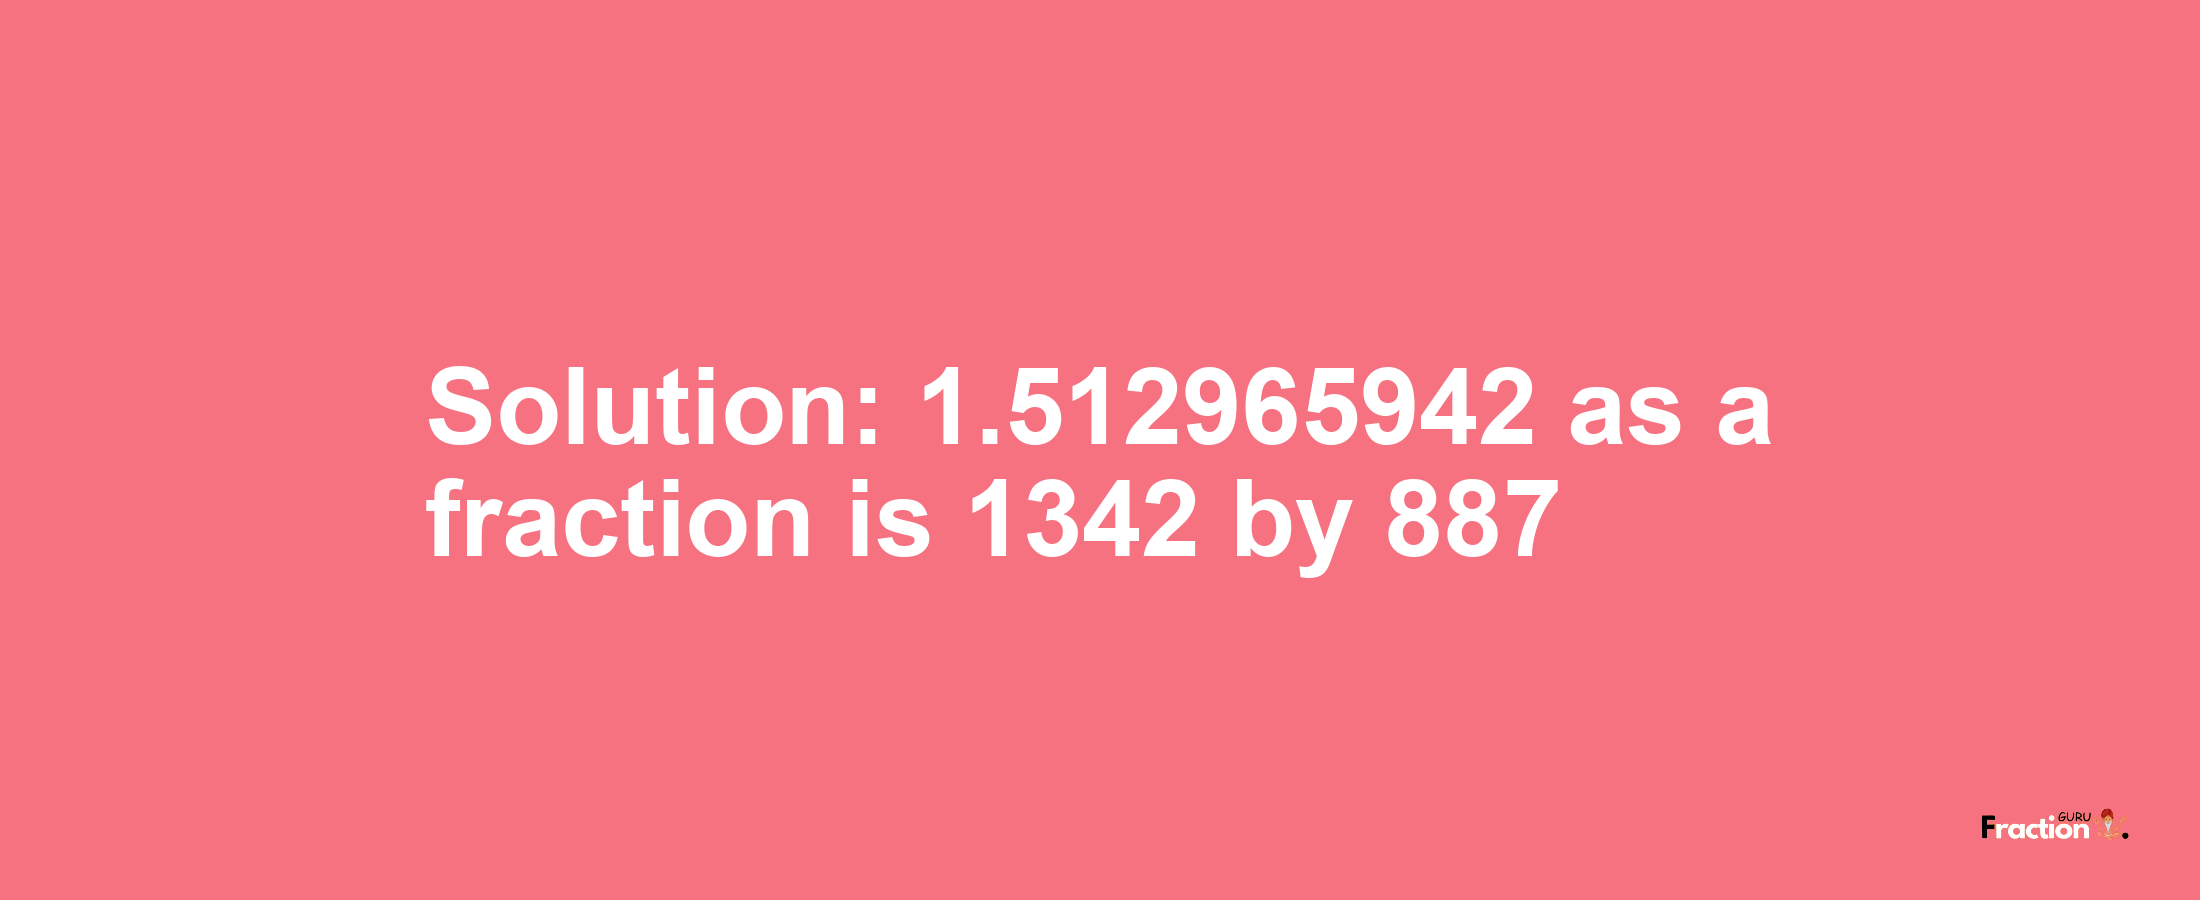 Solution:1.512965942 as a fraction is 1342/887